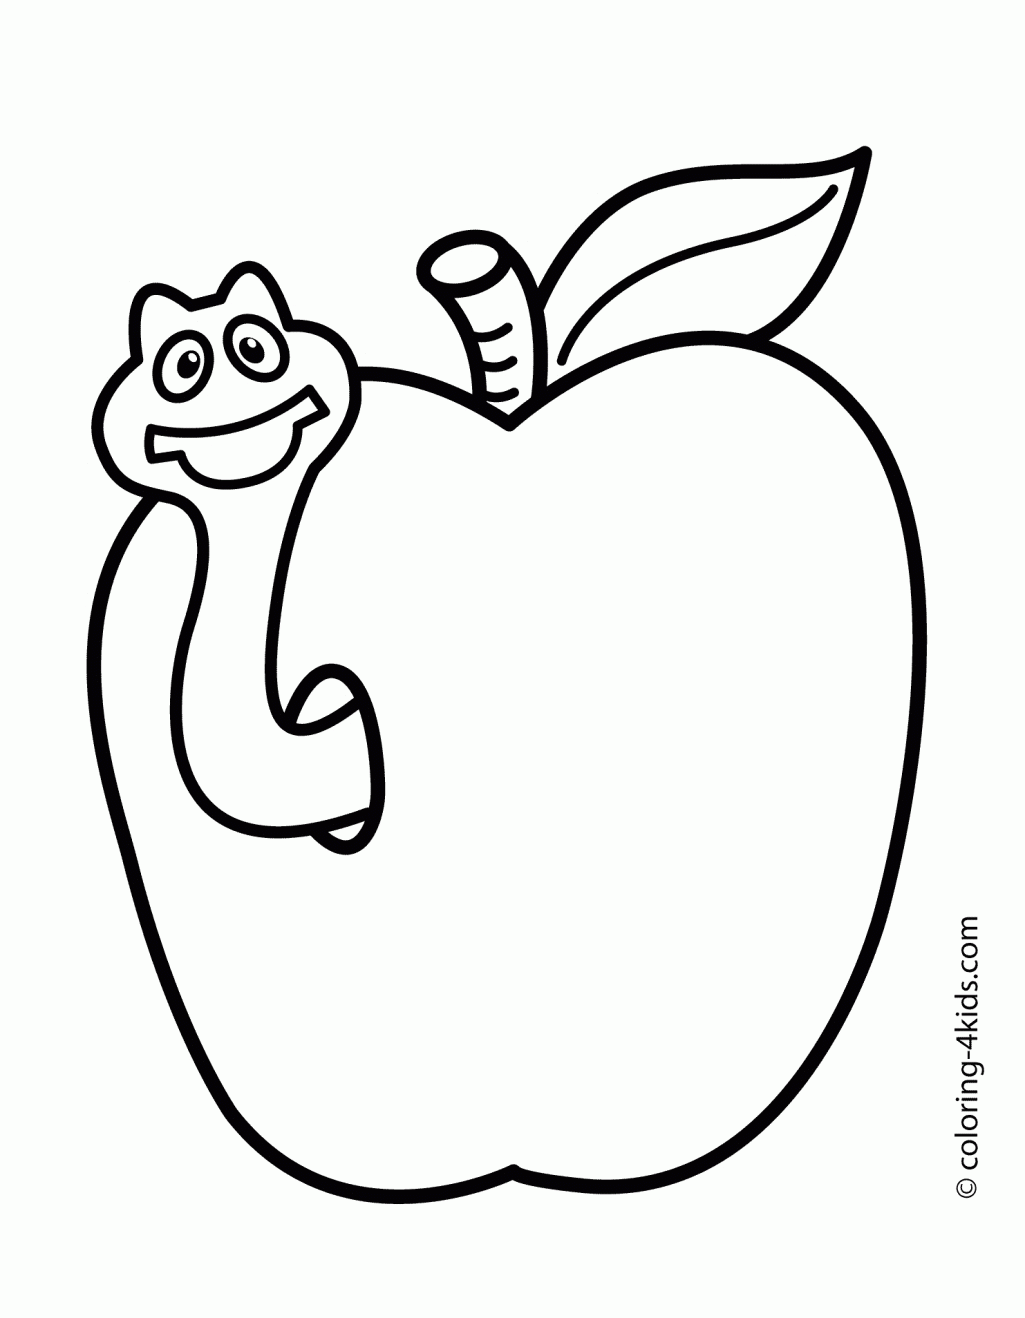 Apricots Fruits Coloring Pages For Kids Printable Free Coloing ...